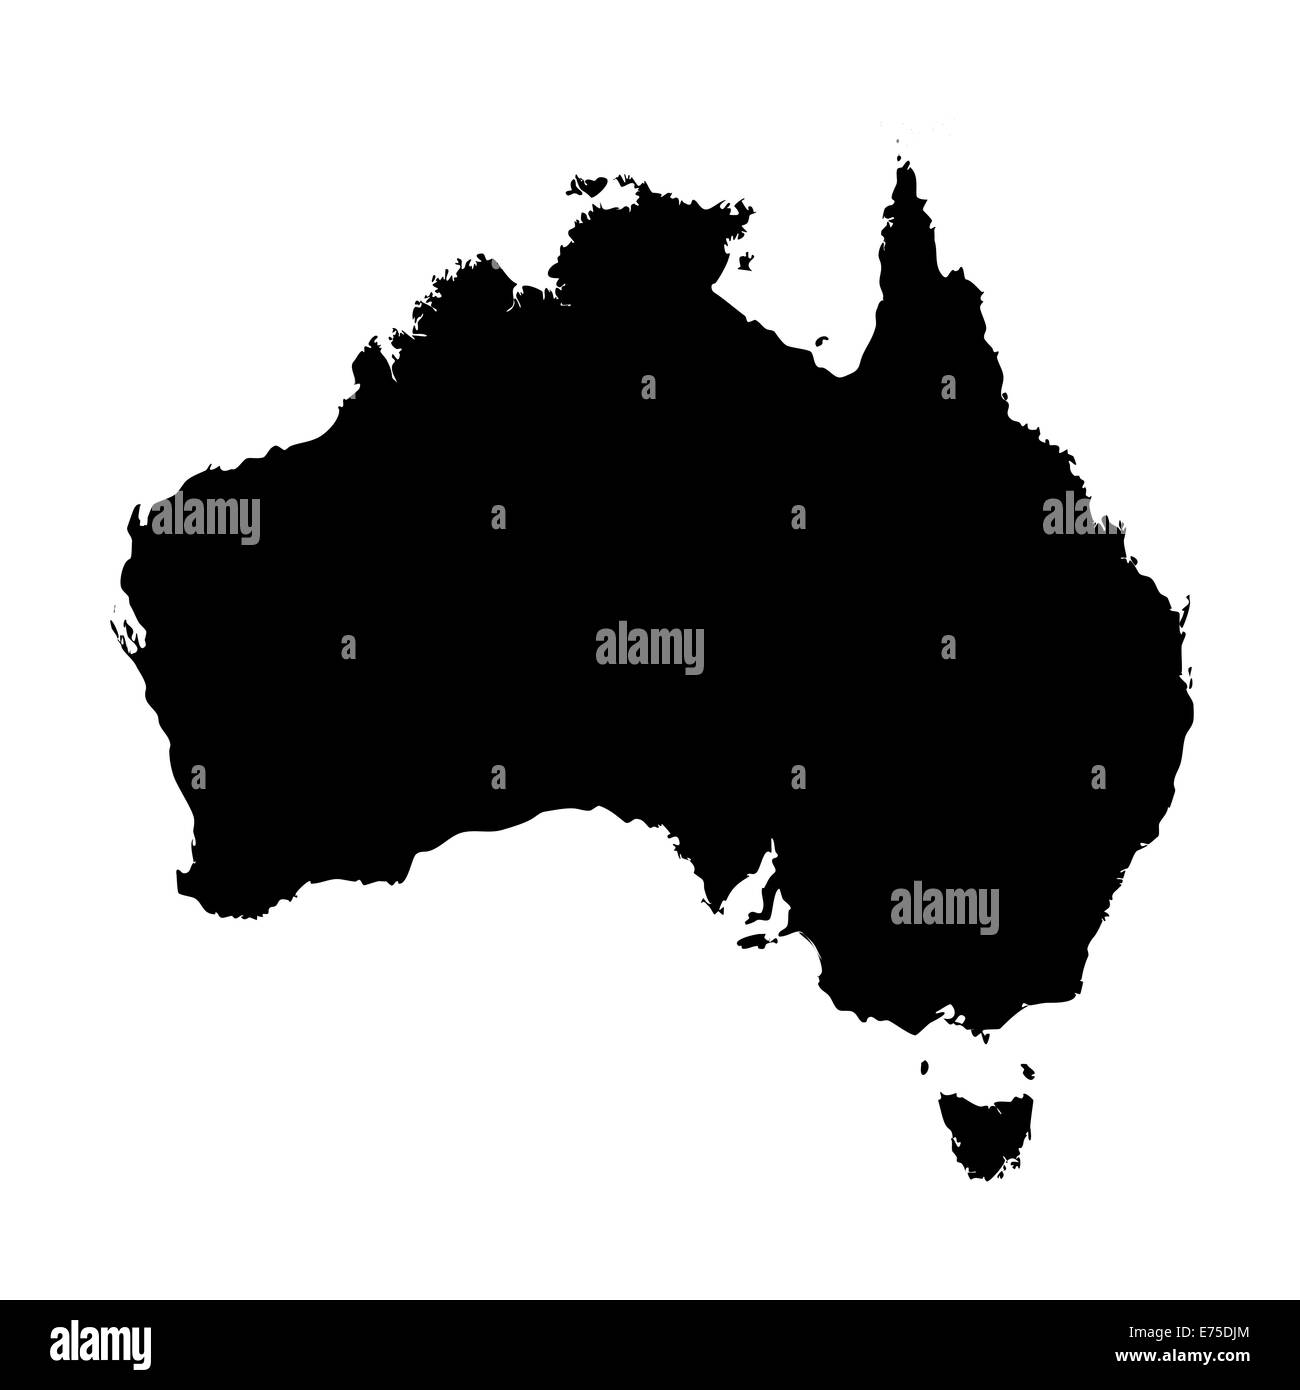 An Illustration on isolated background of the continent of Australia Stock Photo